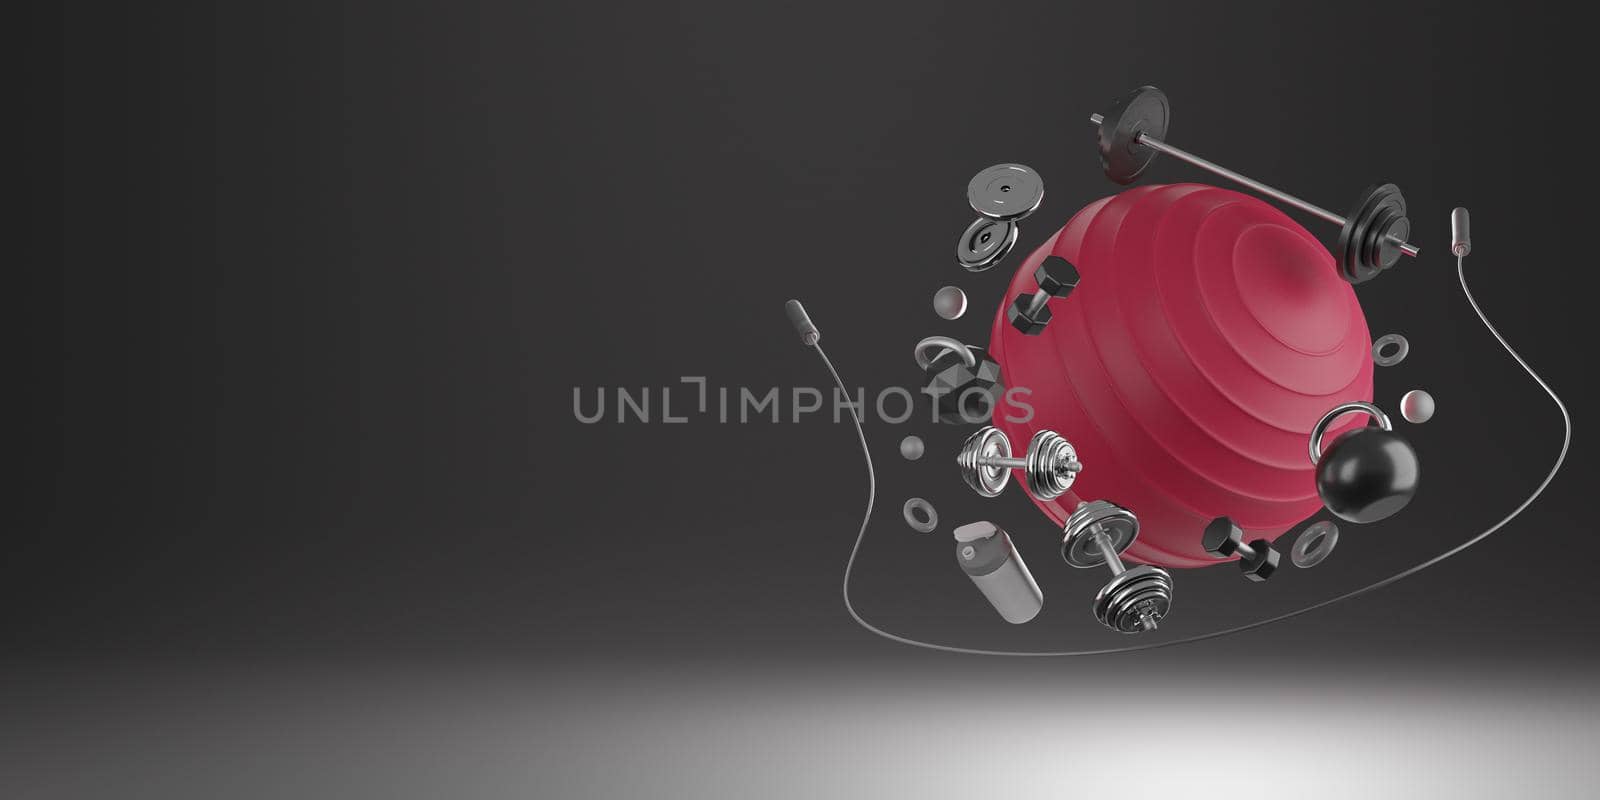 Sport fitness equipment : Red yoga fit ball, bottle of water, dumbbells, skipping rope and barbell on black background. 3D rendering.